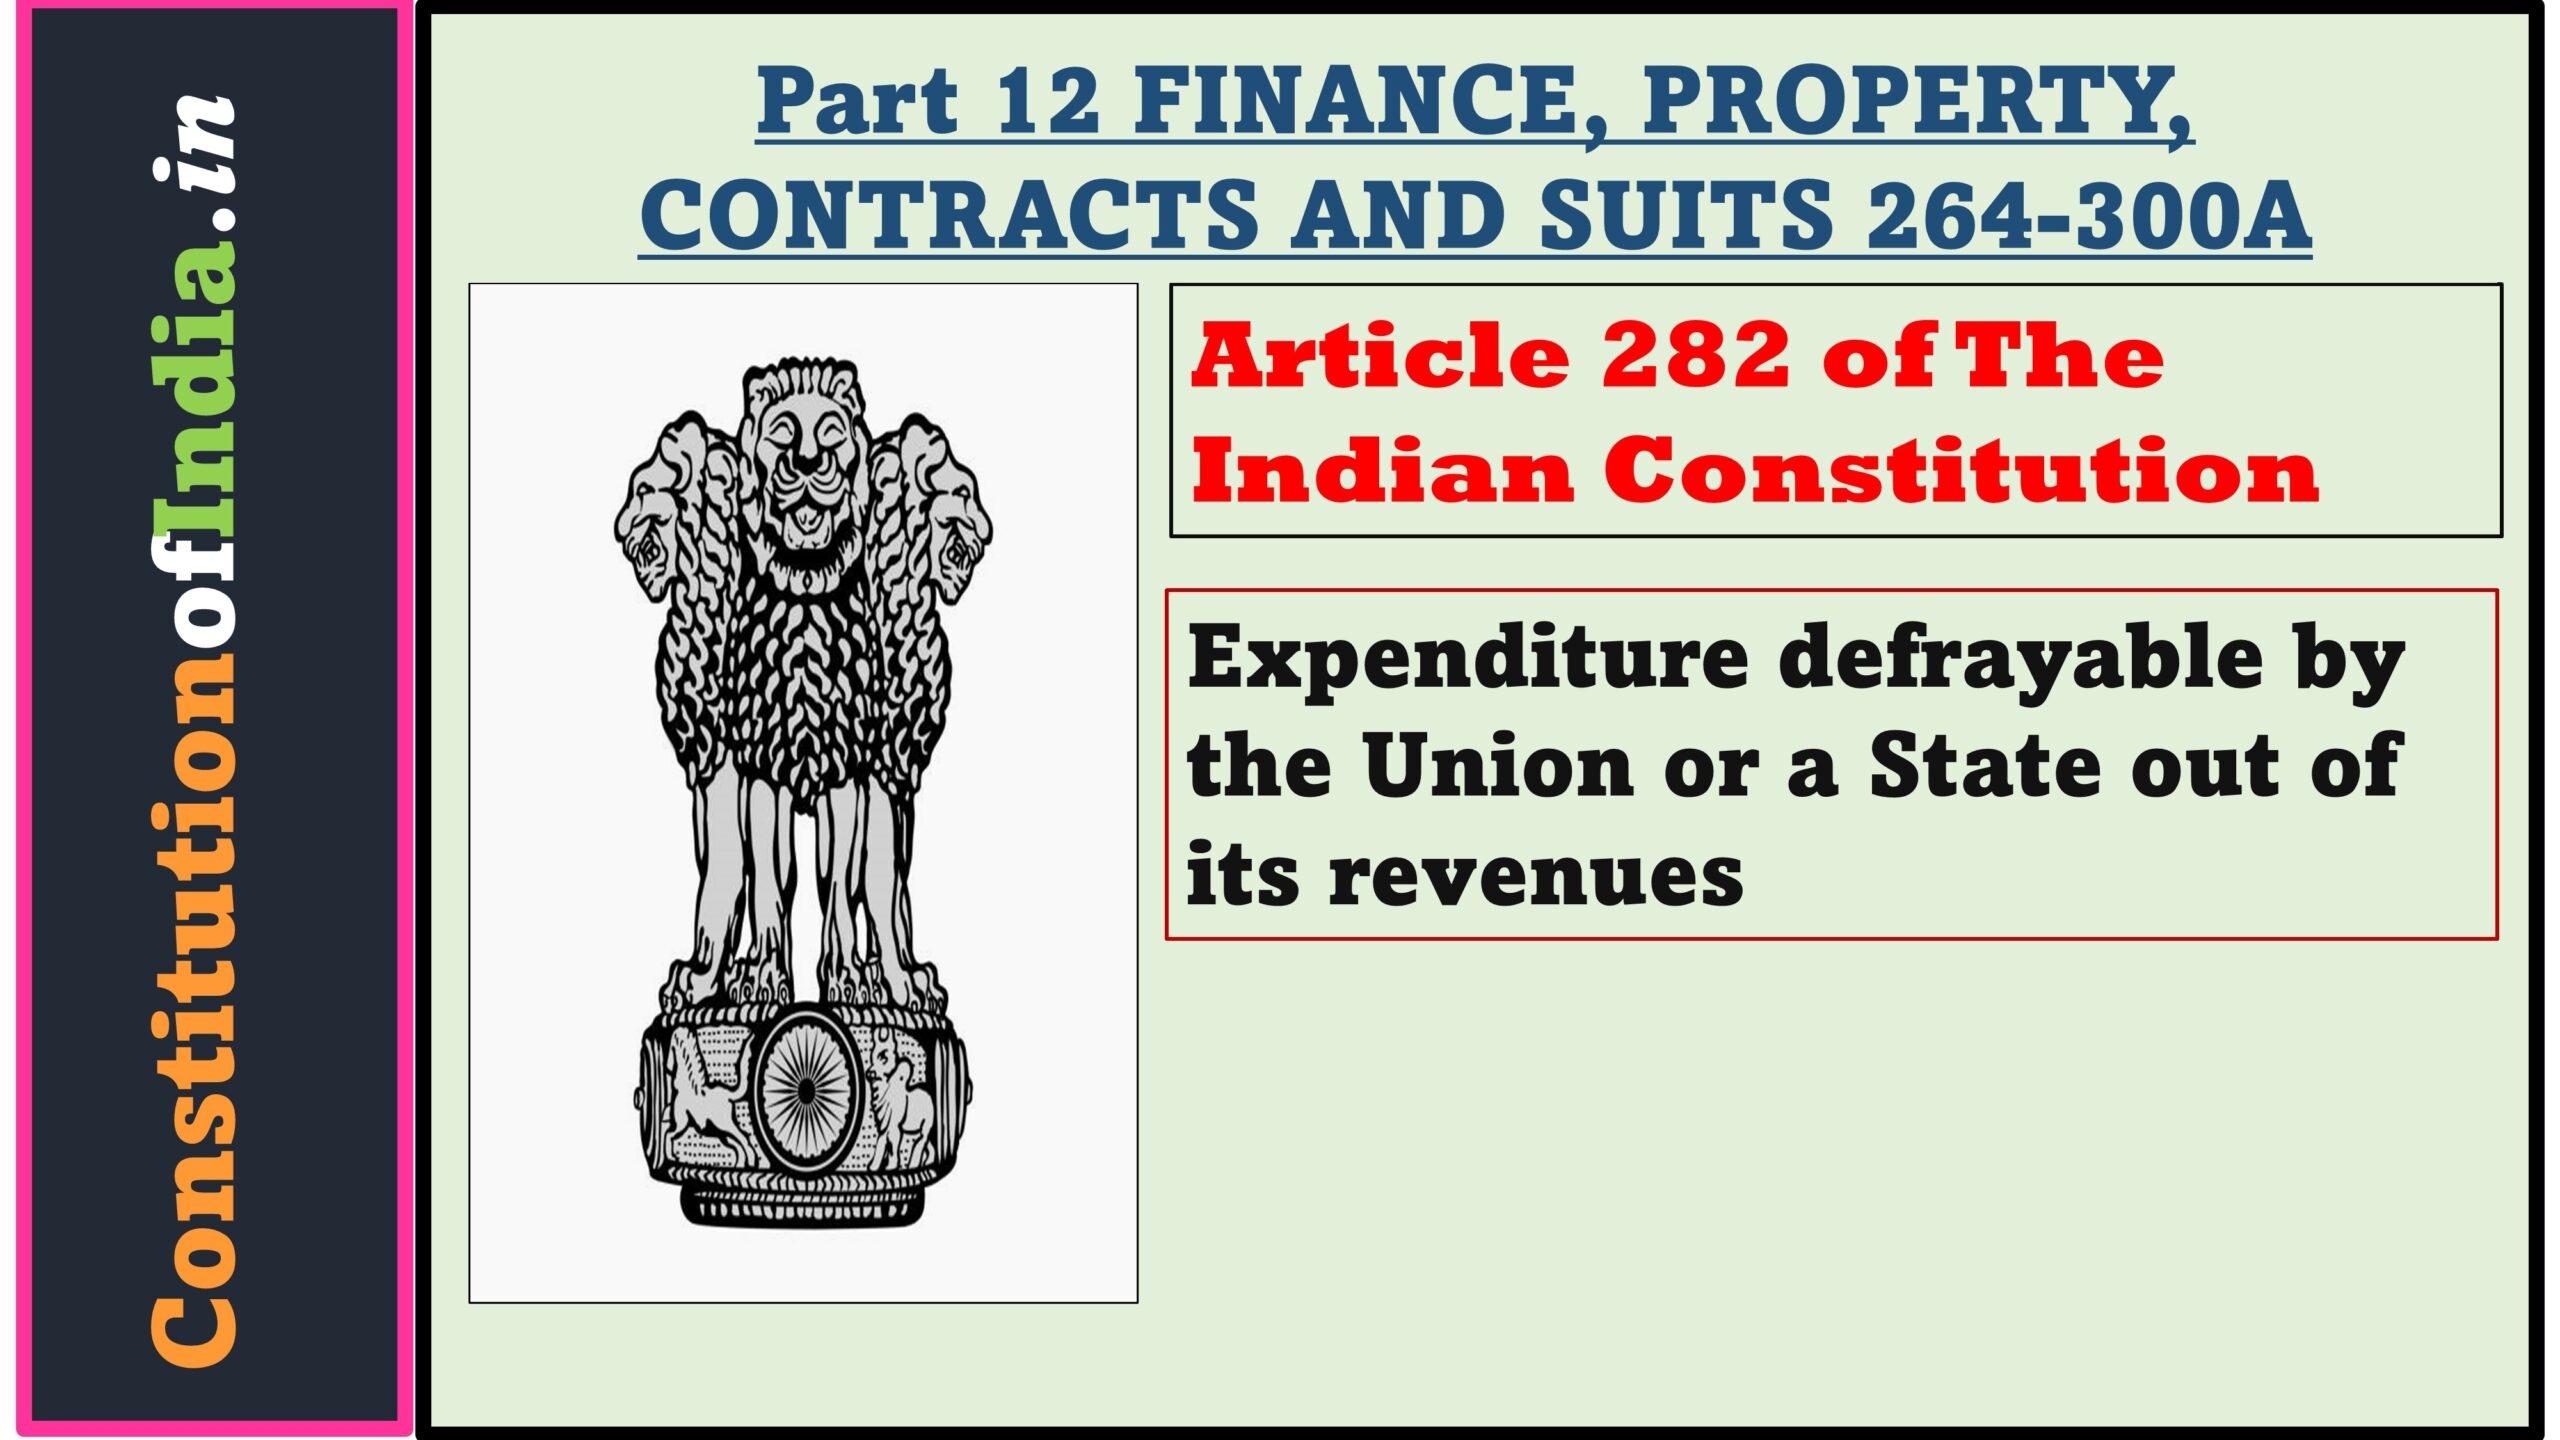 Article 282 of The Indian Constitution